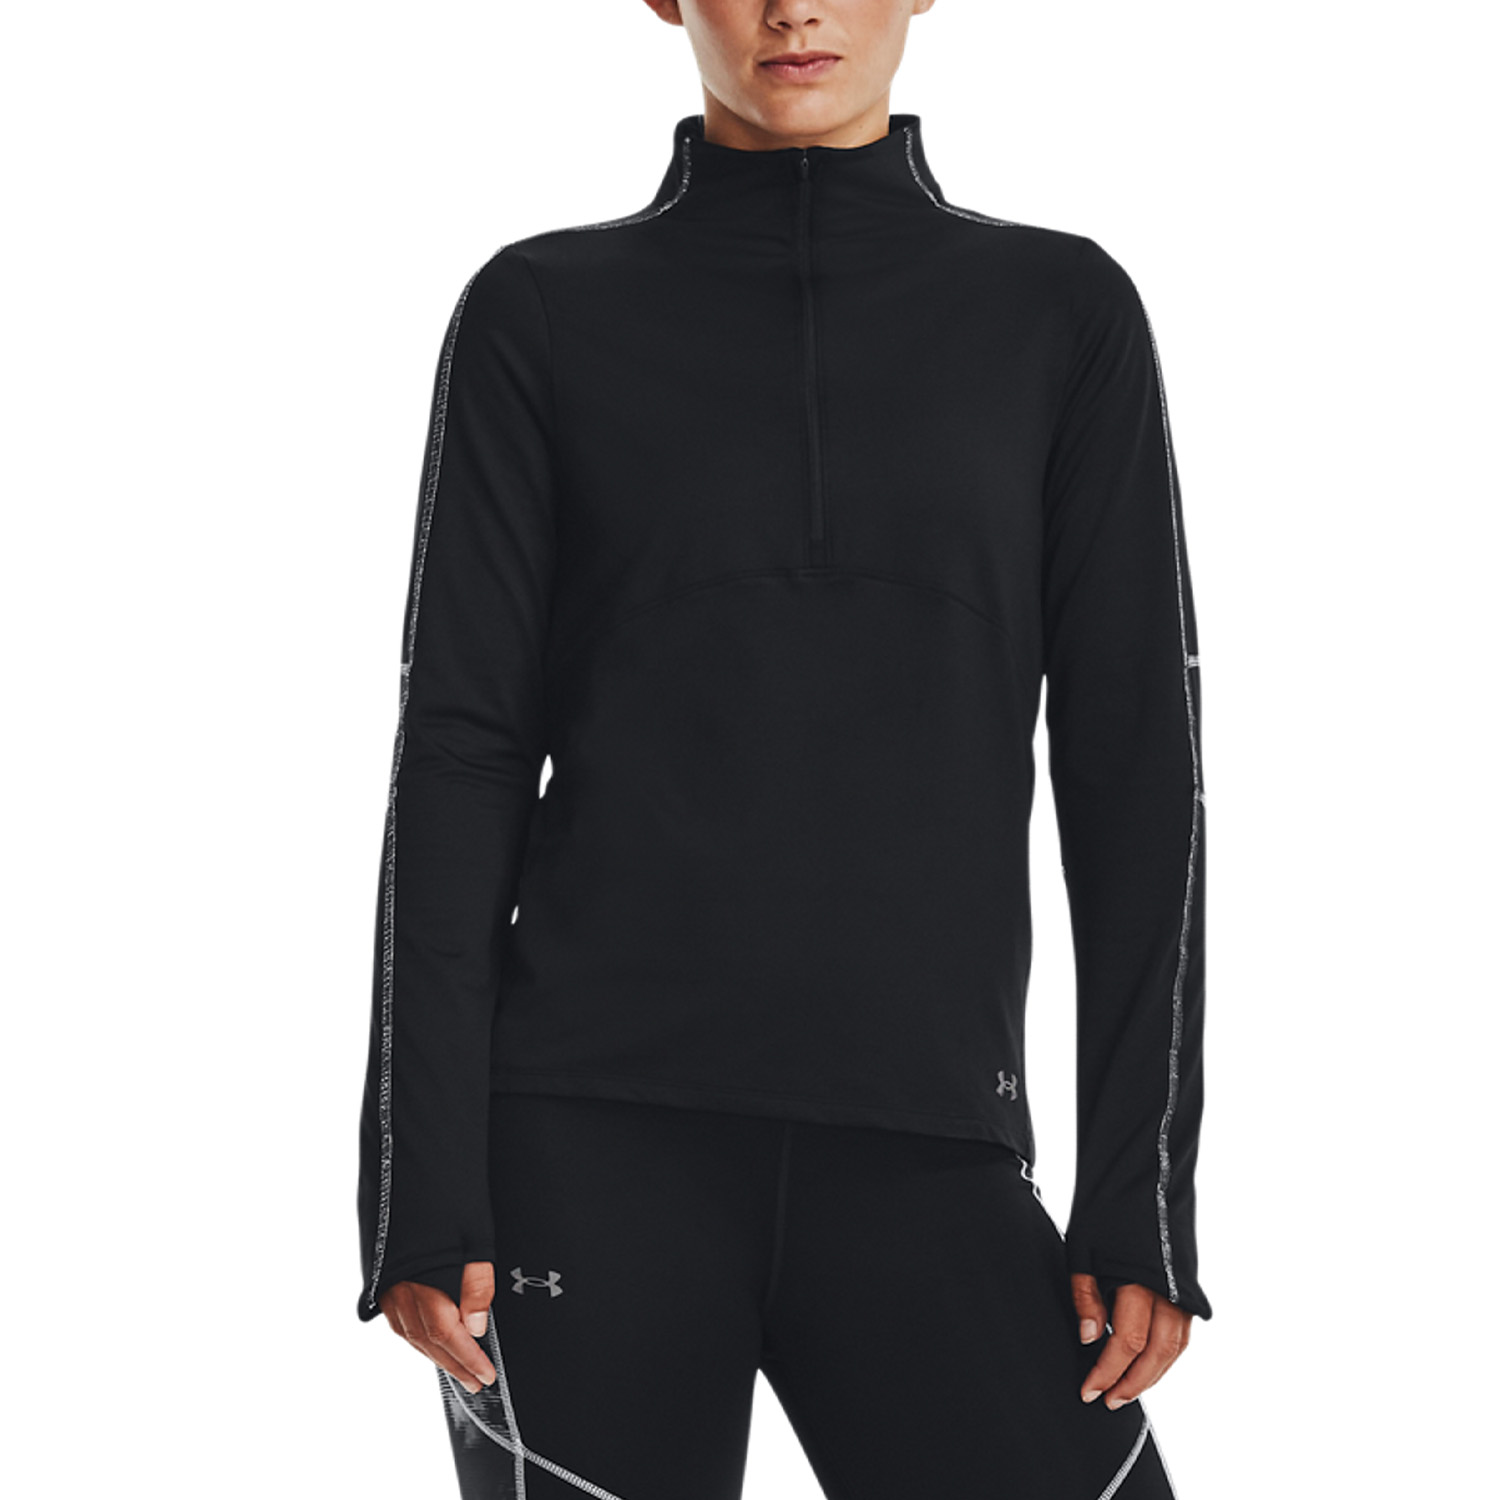 Under Armour Cold Weather Shirt - Black/Jet Gray